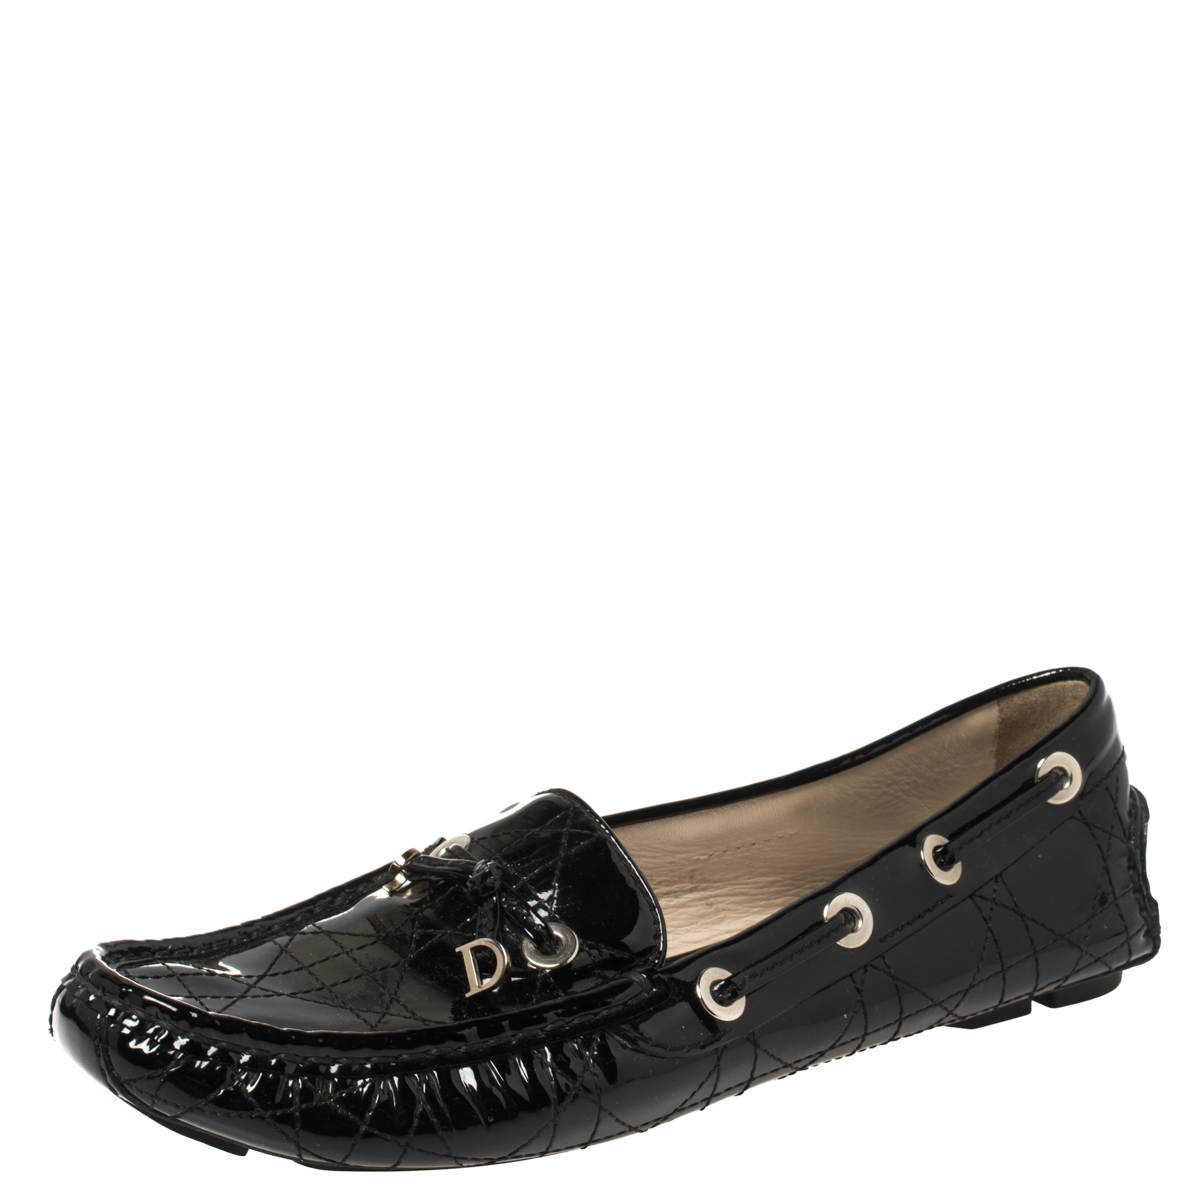 Dior Black Cannage Patent Leather Bow Loafers Size 38